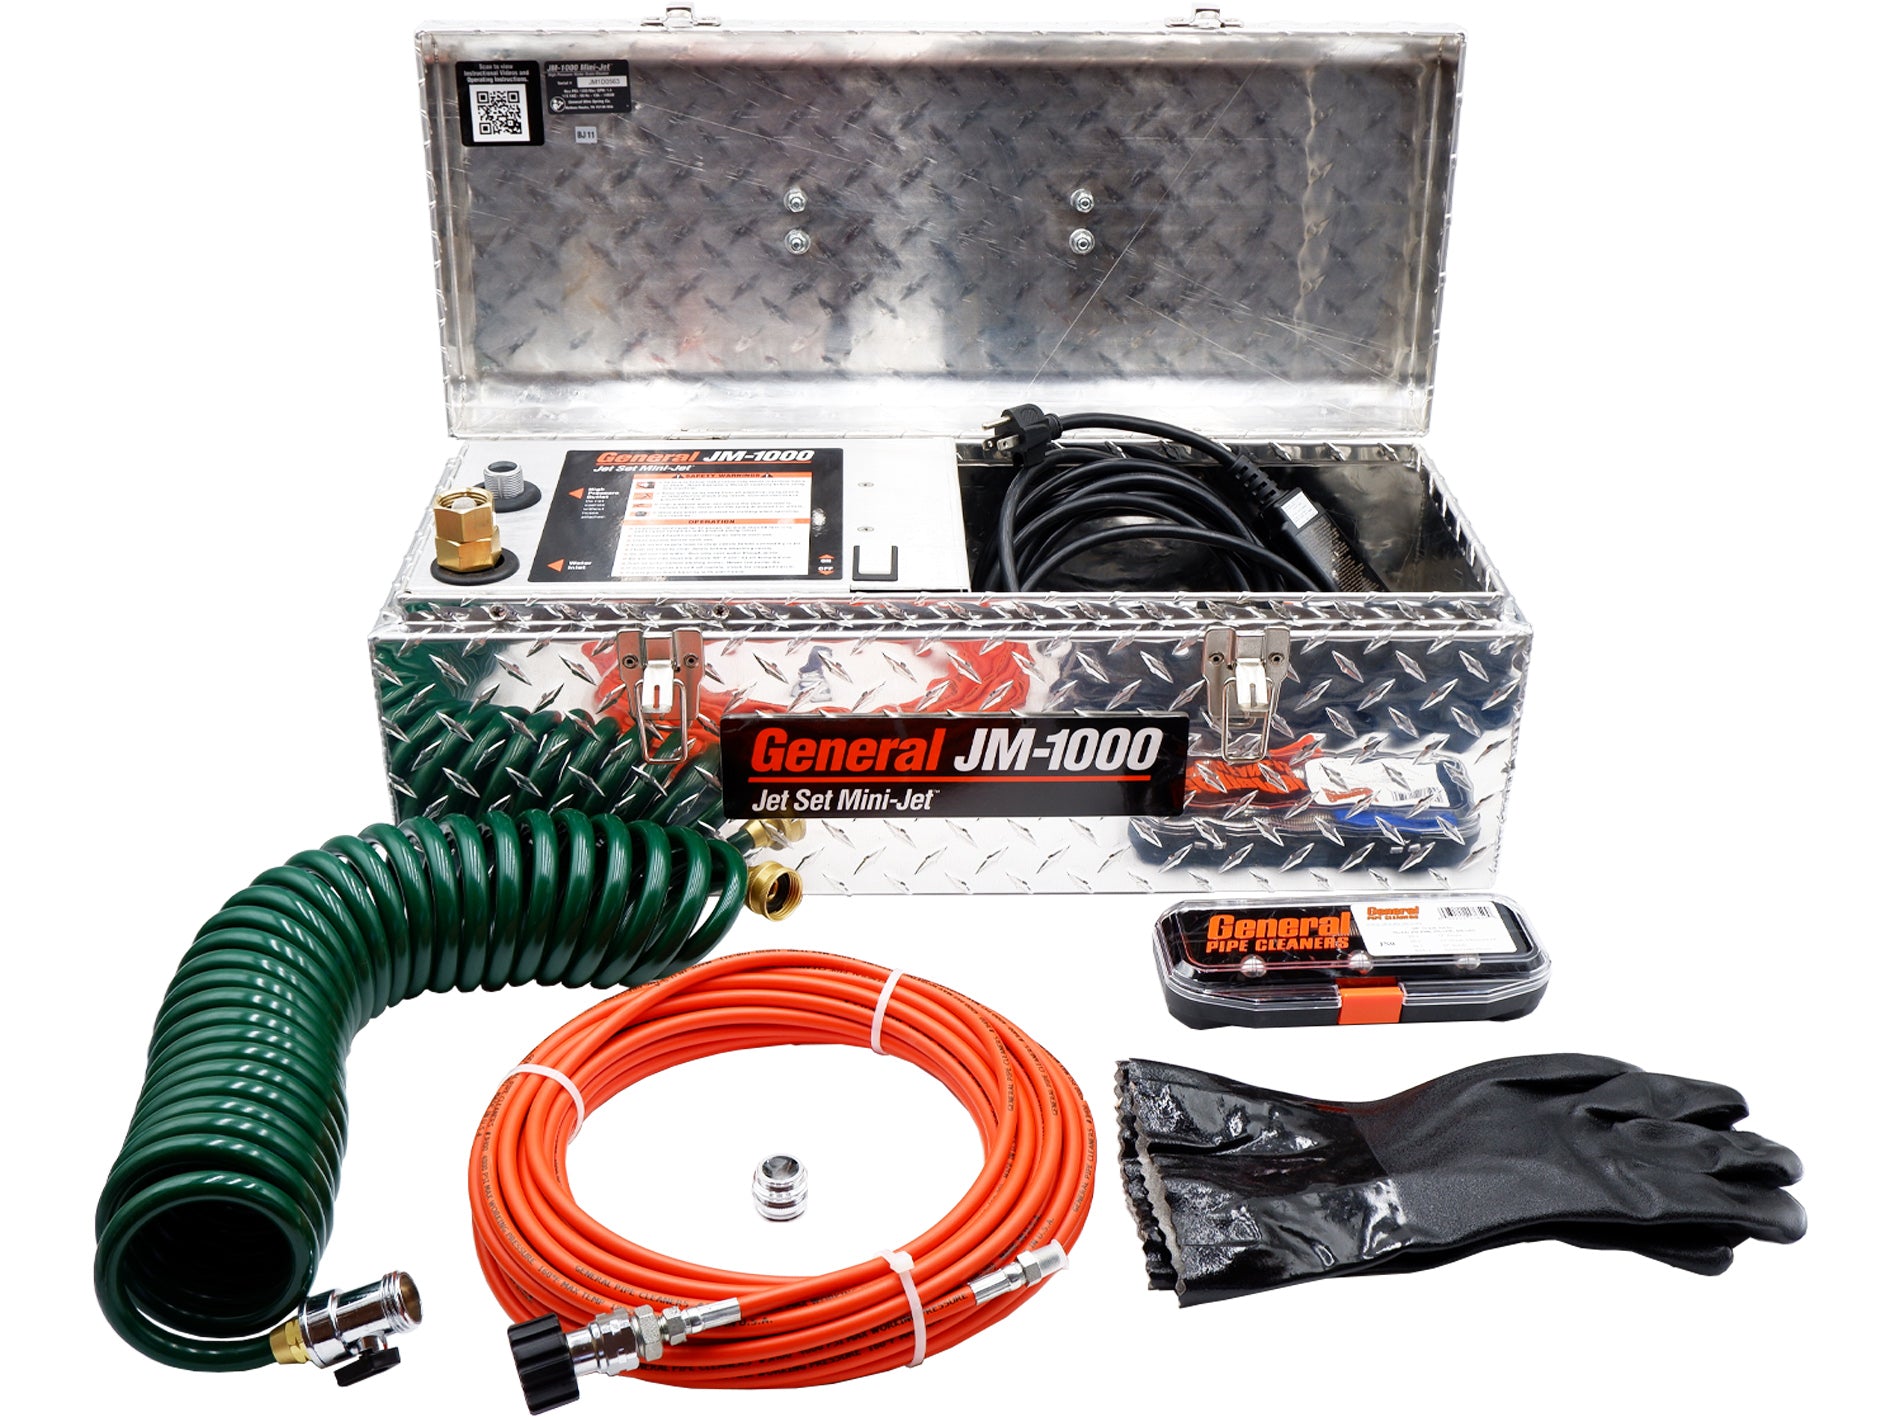 General Pipe Cleaners JM-1000-B Mini Jet Portable Drain Cleaning Machine for 1-1/2" to 3" Lines - 1500 PSI, 1.4 GPM, Vibra-Pulse Technology, USA Made